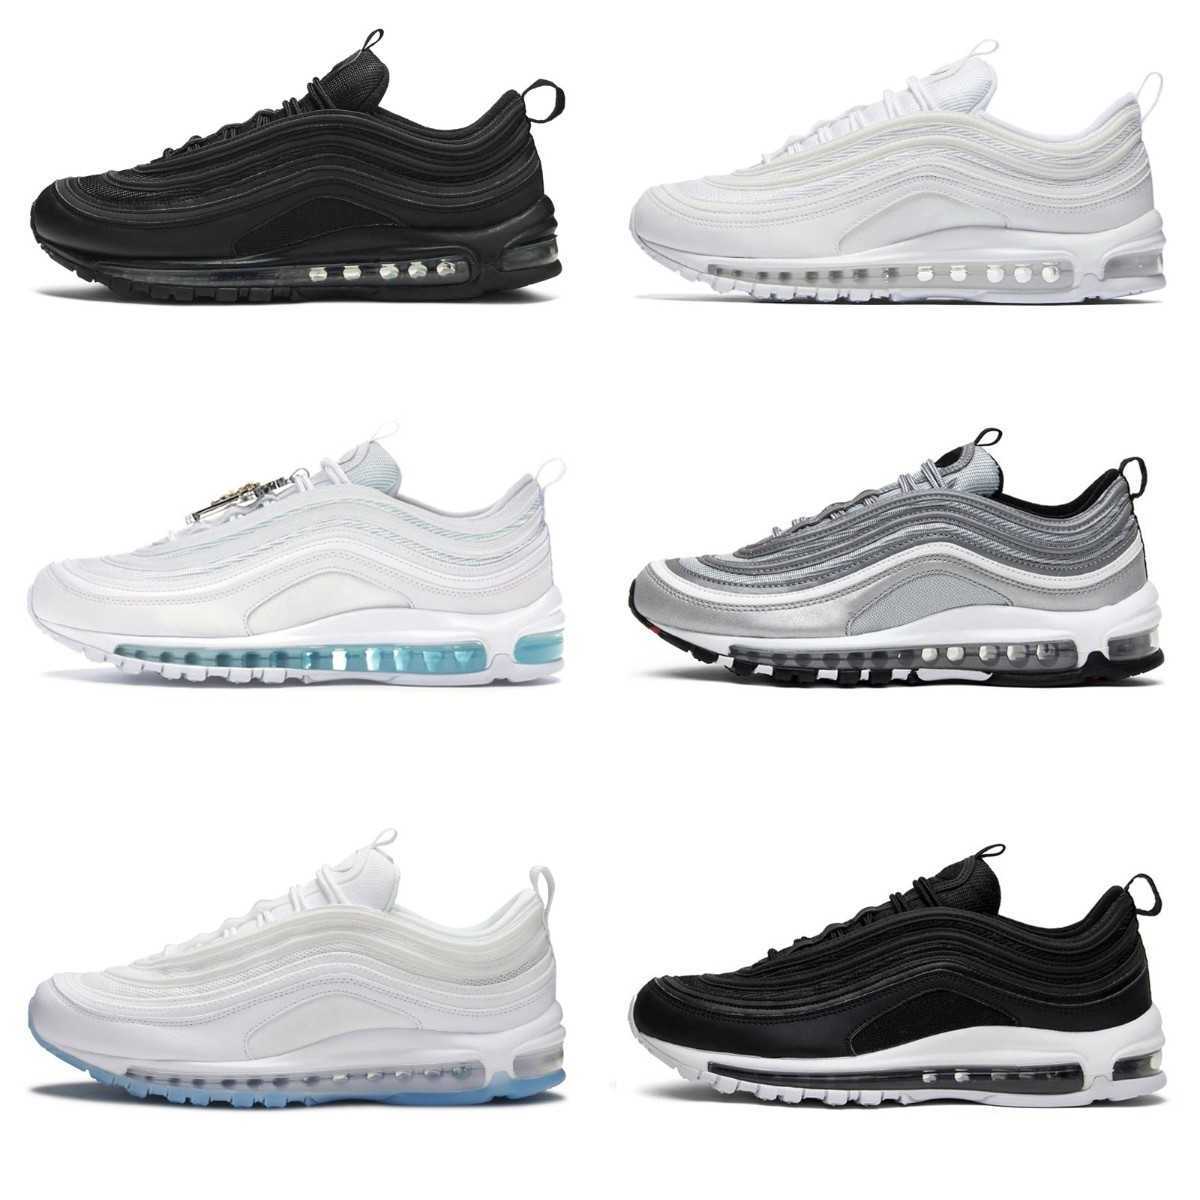 

2023 Classic 97 Sean Wotherspoon 97s Mens Running Shoes Vapores Triple White Black Golf NRG Lucky And Good MSCHF X INRI Jesus Celestial Men Women Trainer Sneakers S9, Please contact us